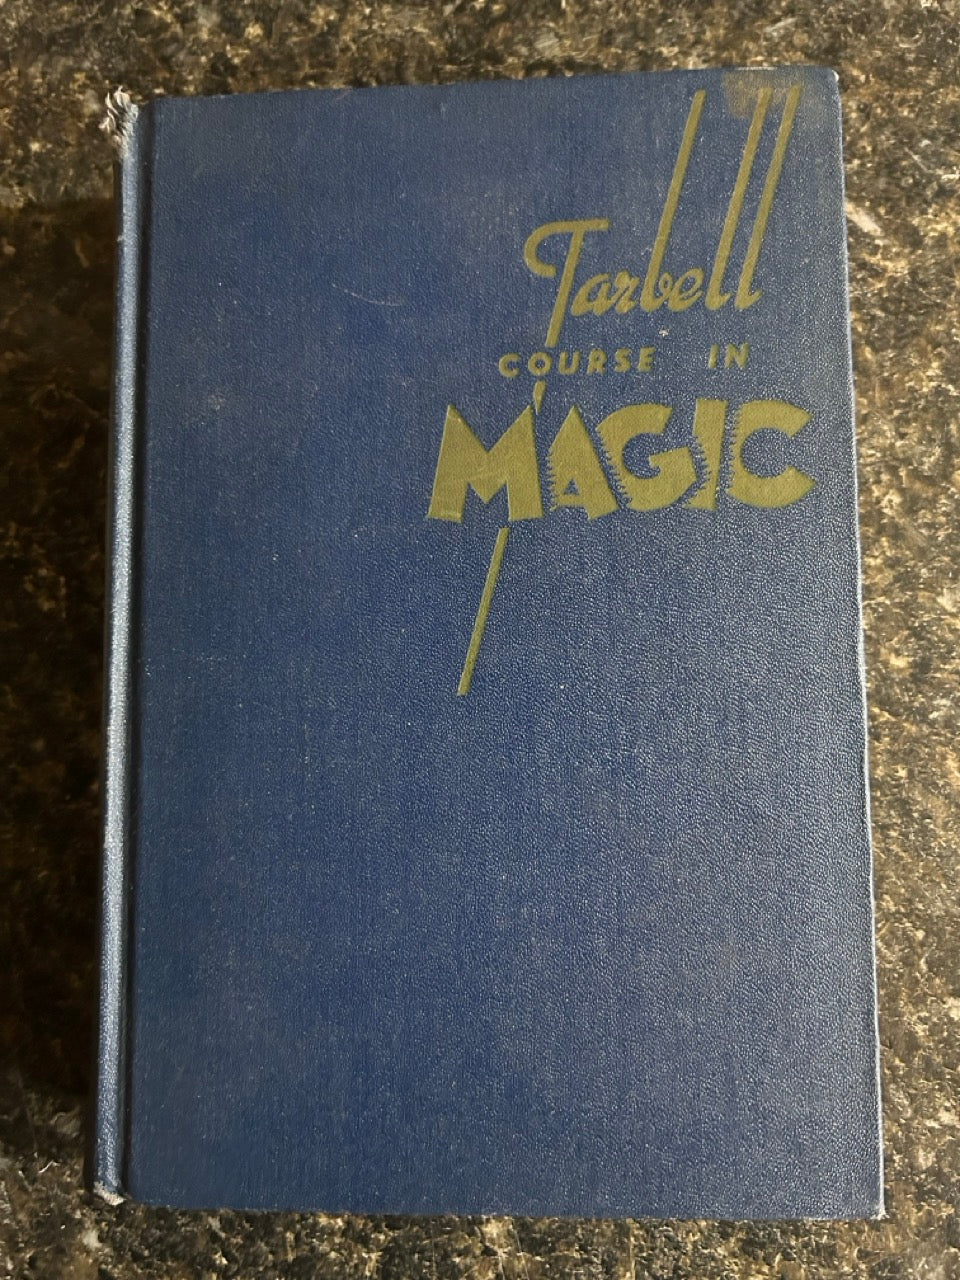 Tarbell Course in Magic Vol. 2 - Harlan Tarbell (USED)